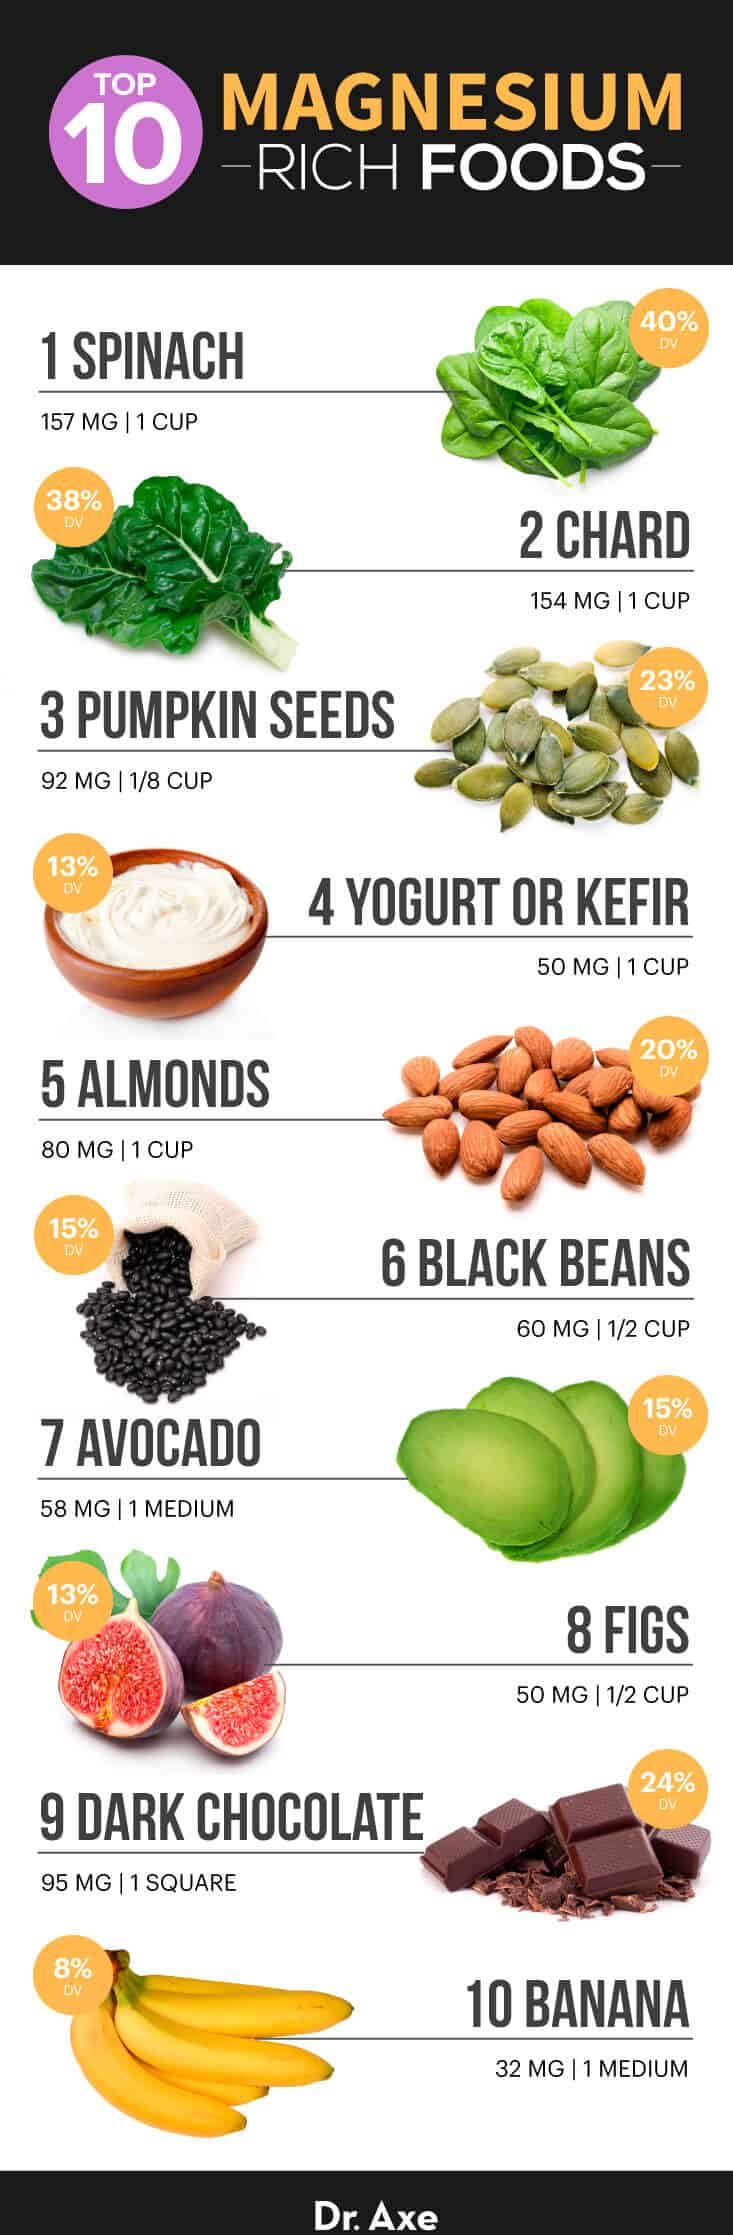 Magnesium-rich foods - Dr. Axe